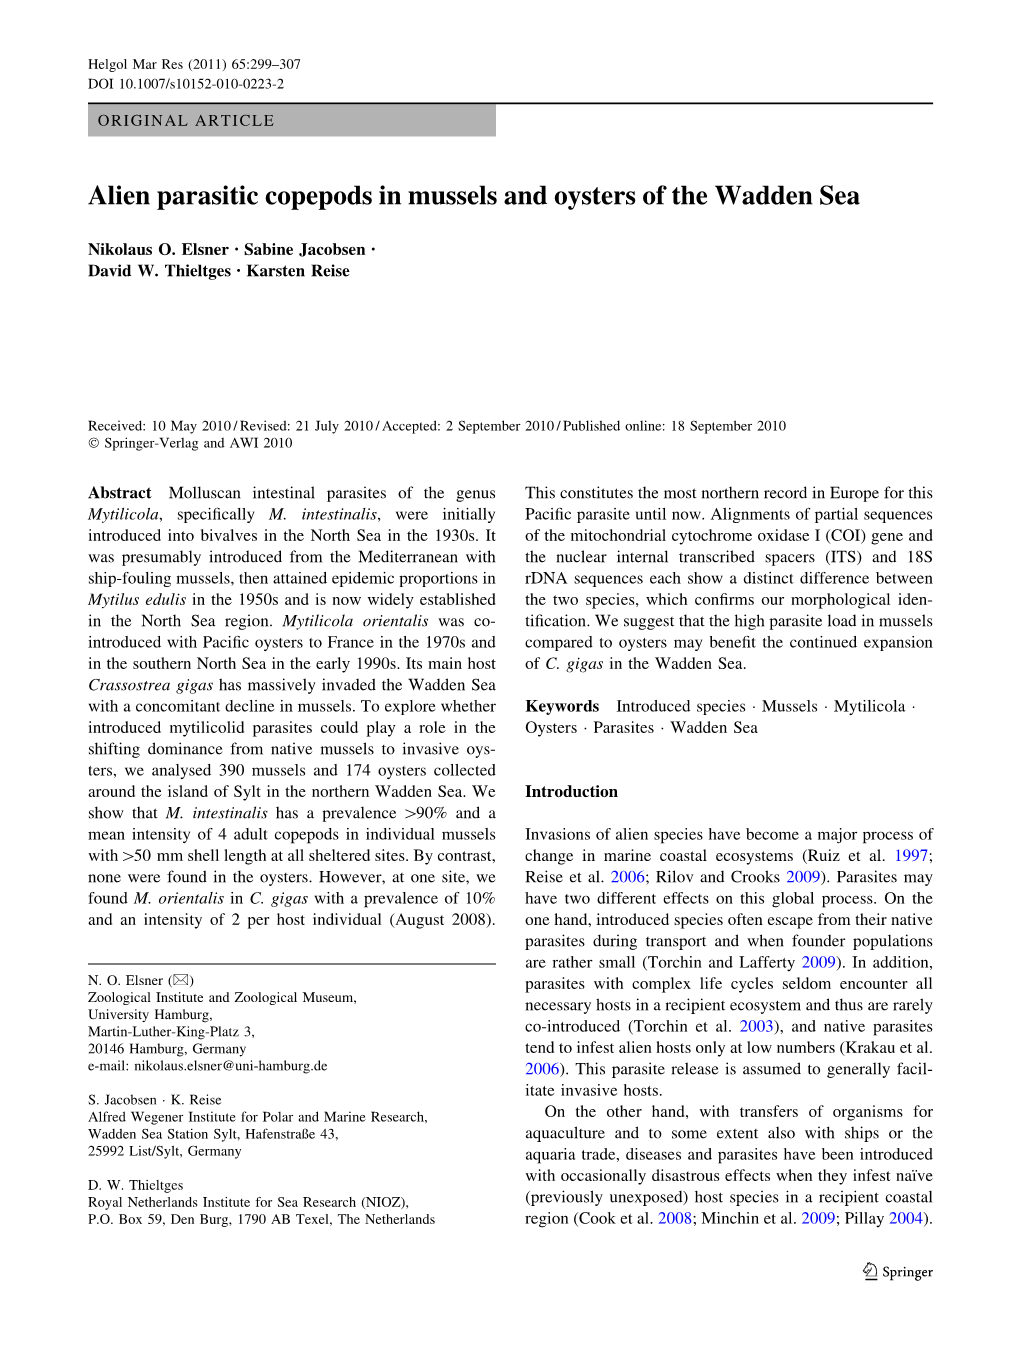 Alien Parasitic Copepods in Mussels and Oysters of the Wadden Sea